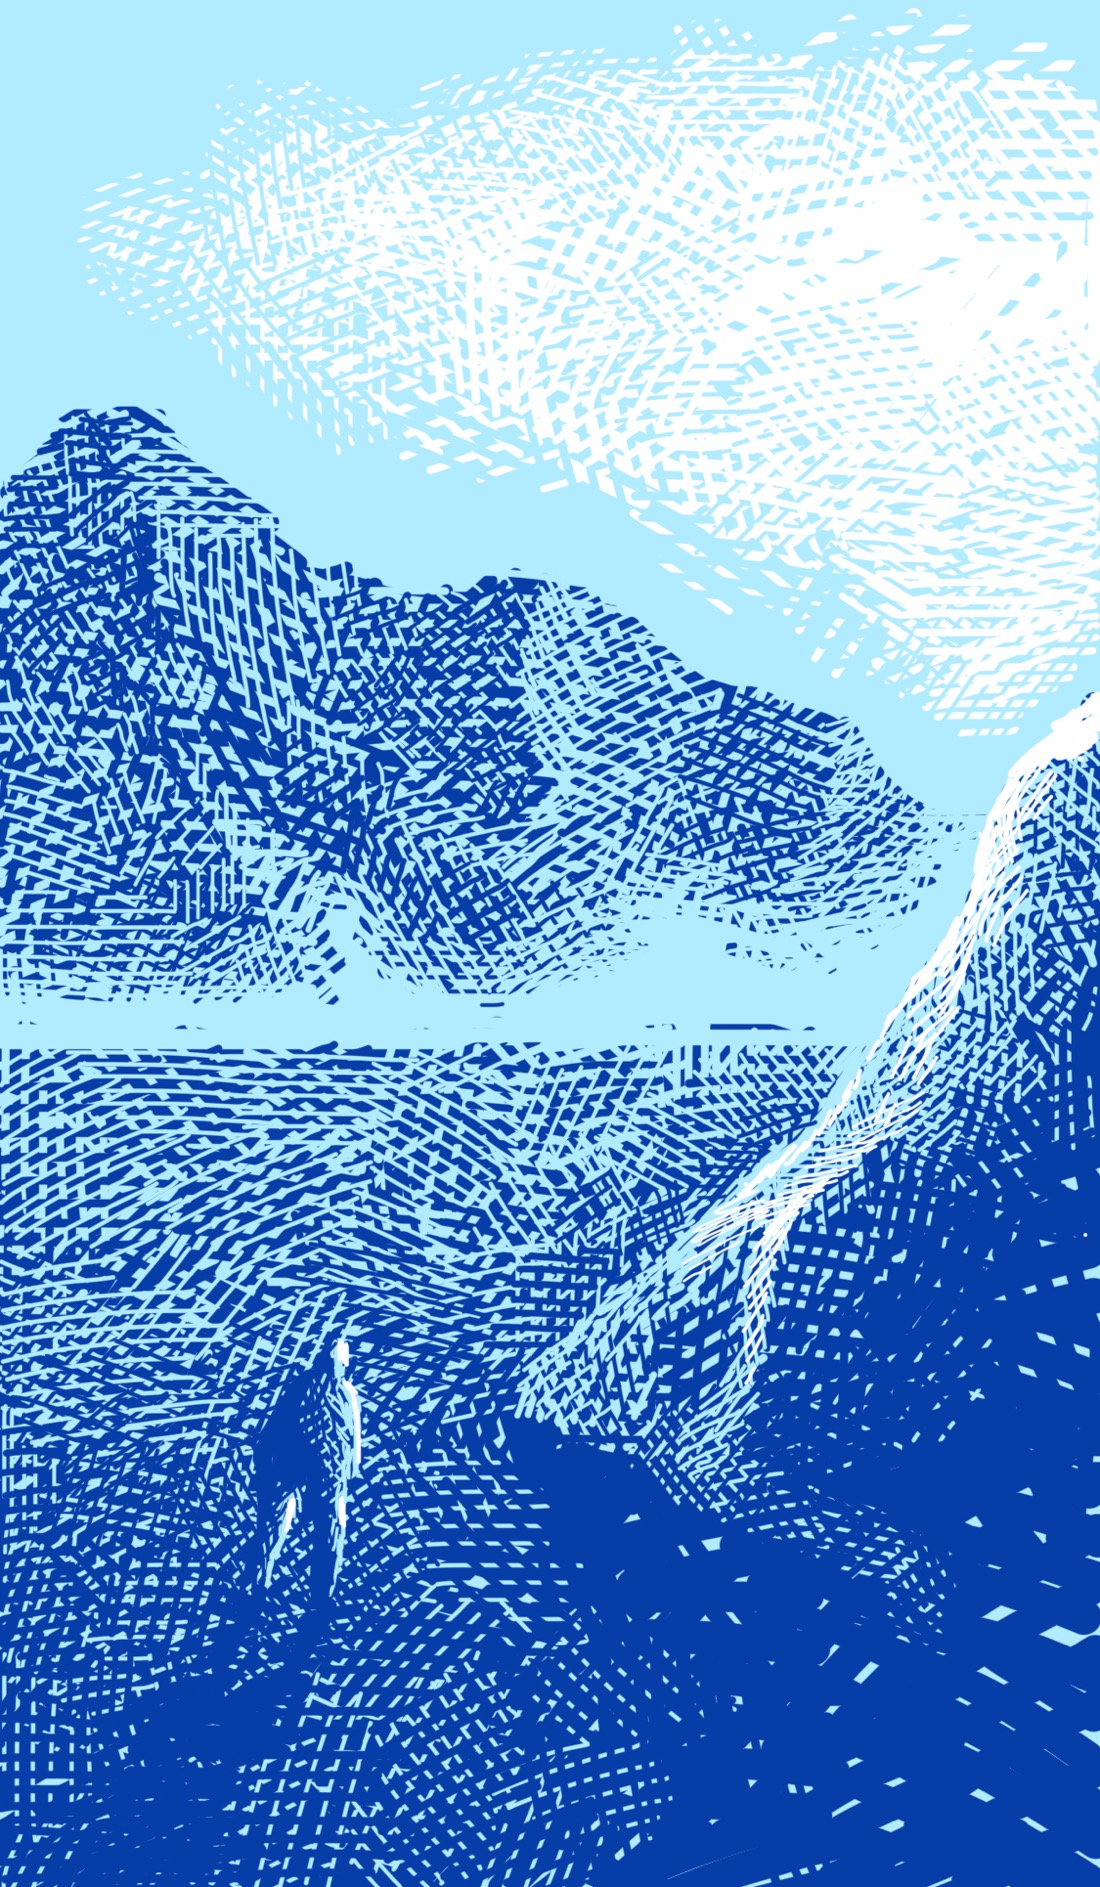 A flat plane: maybe a desert, but it kind of looks like a frozen lake. In the distance are craggy mountains. Positioned on the plane nearer to the viewer, like an iceberg poking out of the ice, is a sharply angular mountain or boulder. Walking across the plane next to the boulder is a small figure, casting a shadow. The drawing is dark blue ink on the light blue background. In the sky, the clouds are rendered in white.